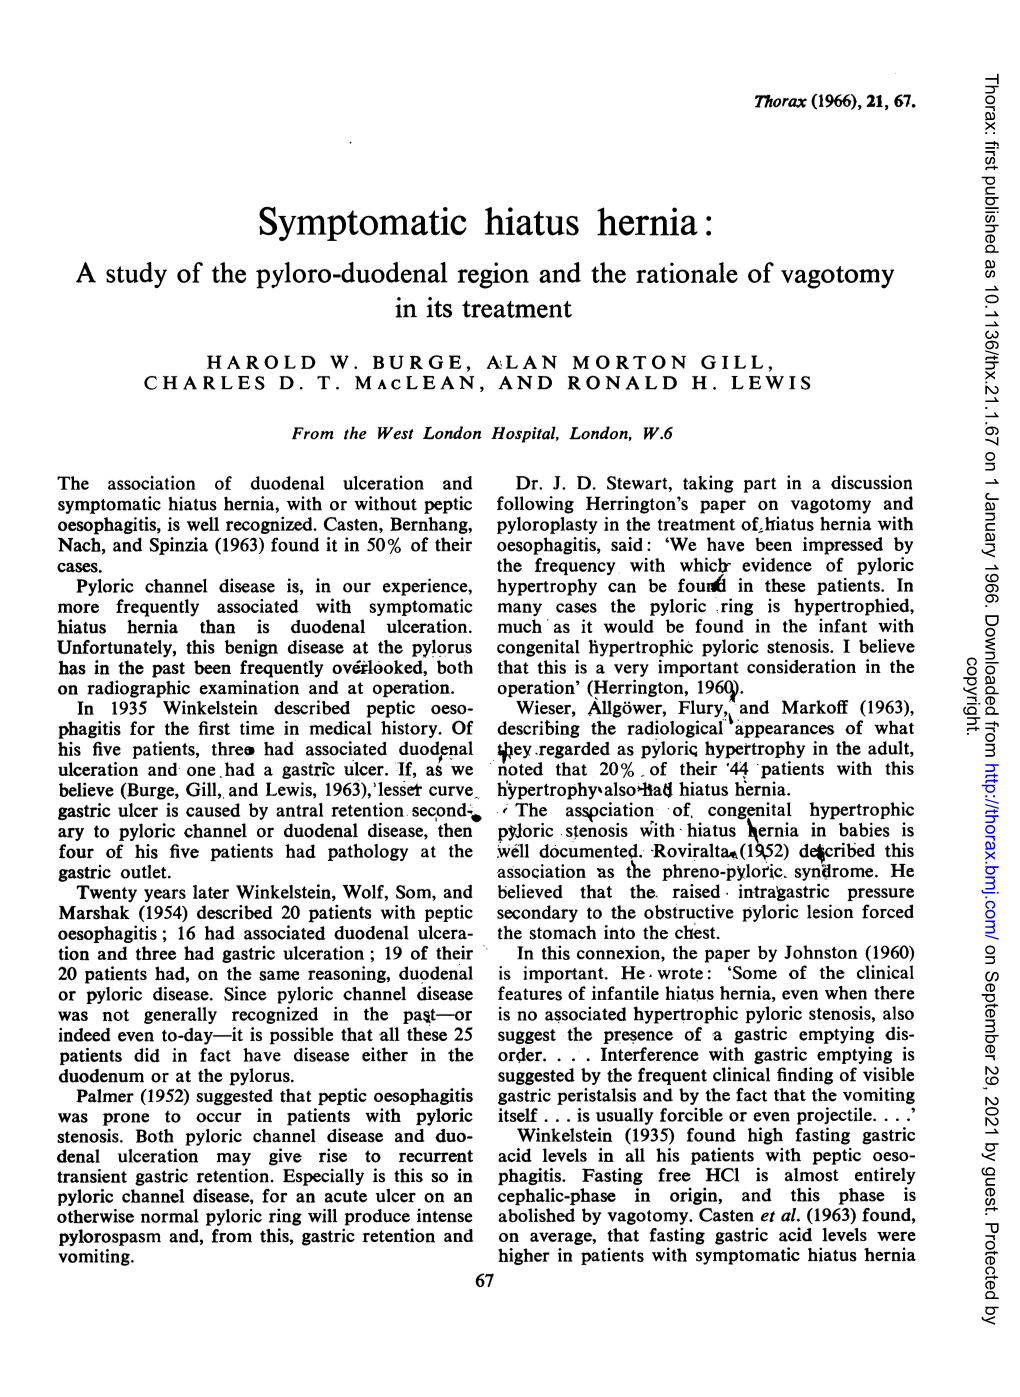 Symptomatic Hiatus Hernia: a Study of the Pyloro-Duodenal Region and the Rationale of Vagotomy in Its Treatment